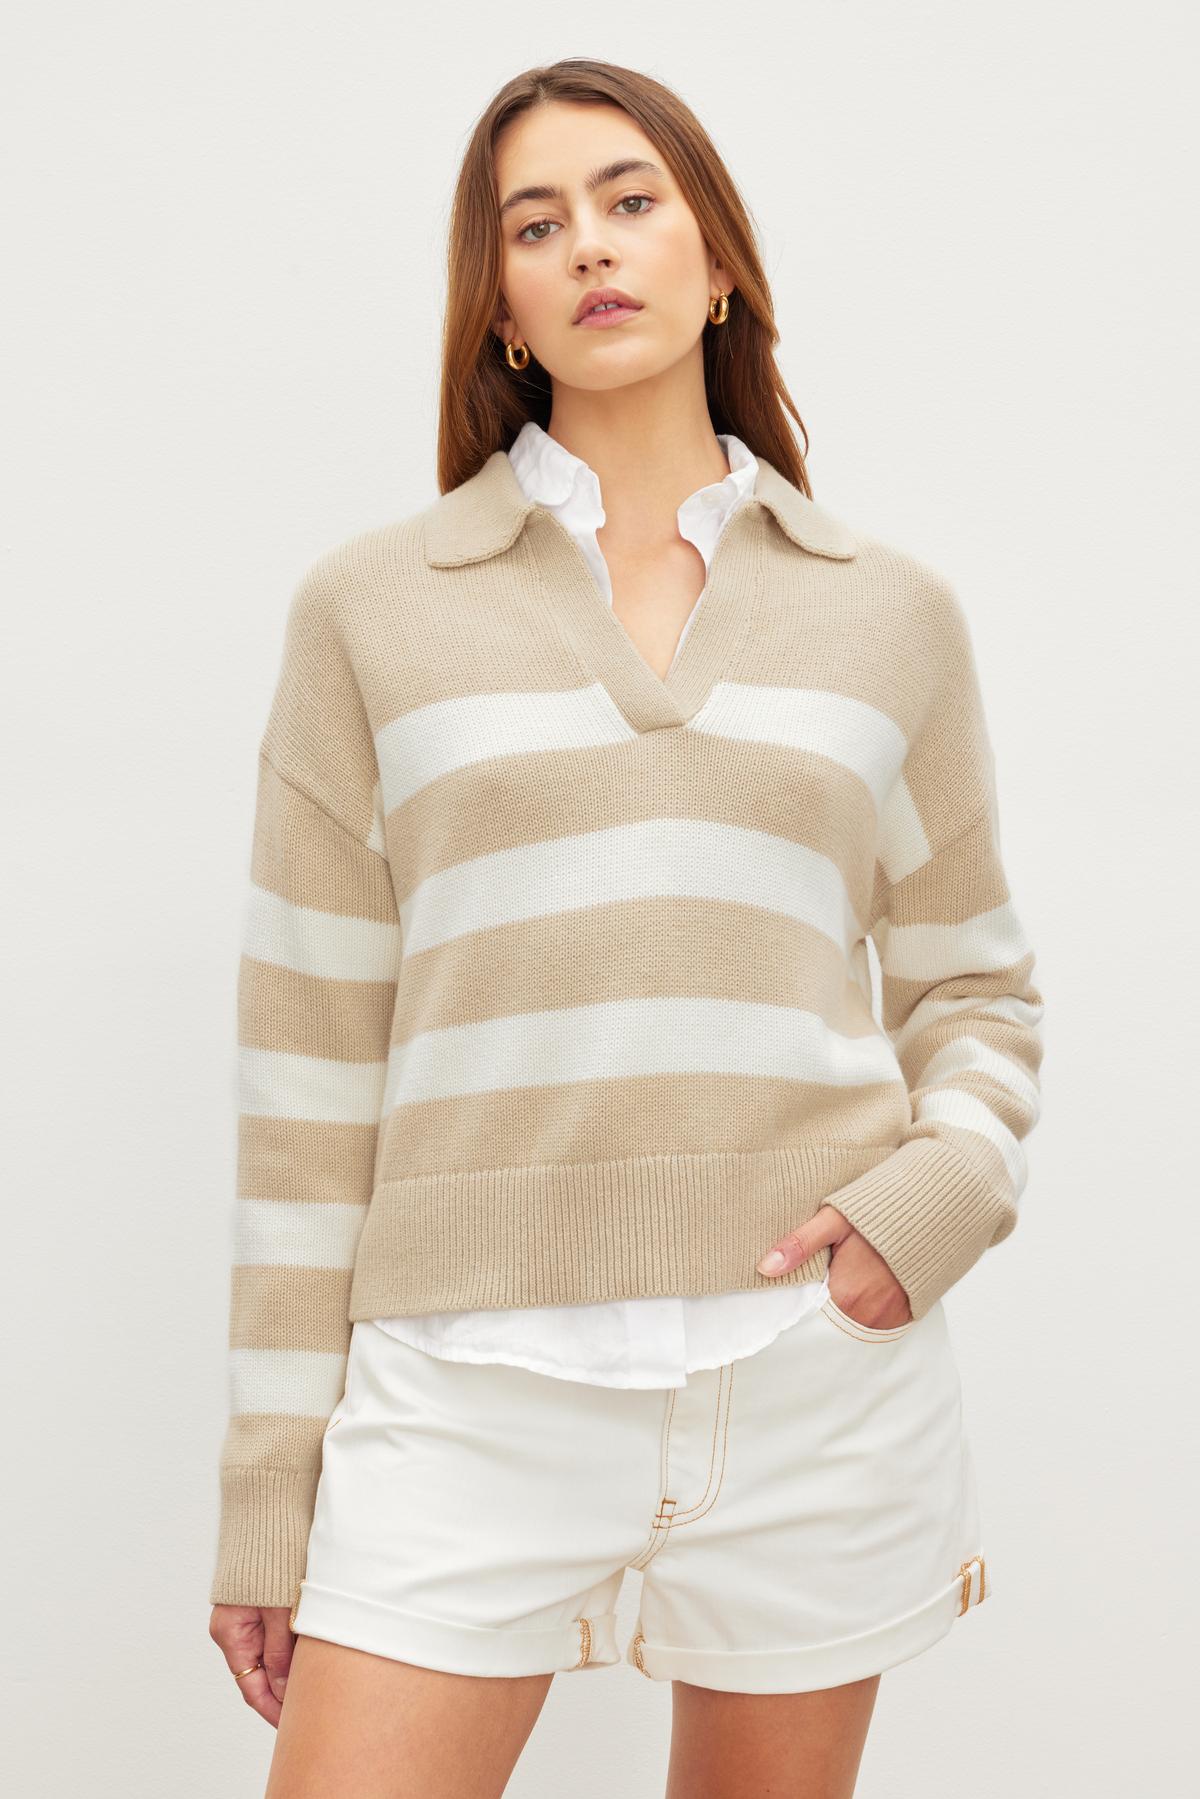 The model is wearing a beige LUCIE POLO SWEATER by Velvet by Graham & Spencer and white shorts made of a cotton/cashmere blend.-36248057970881